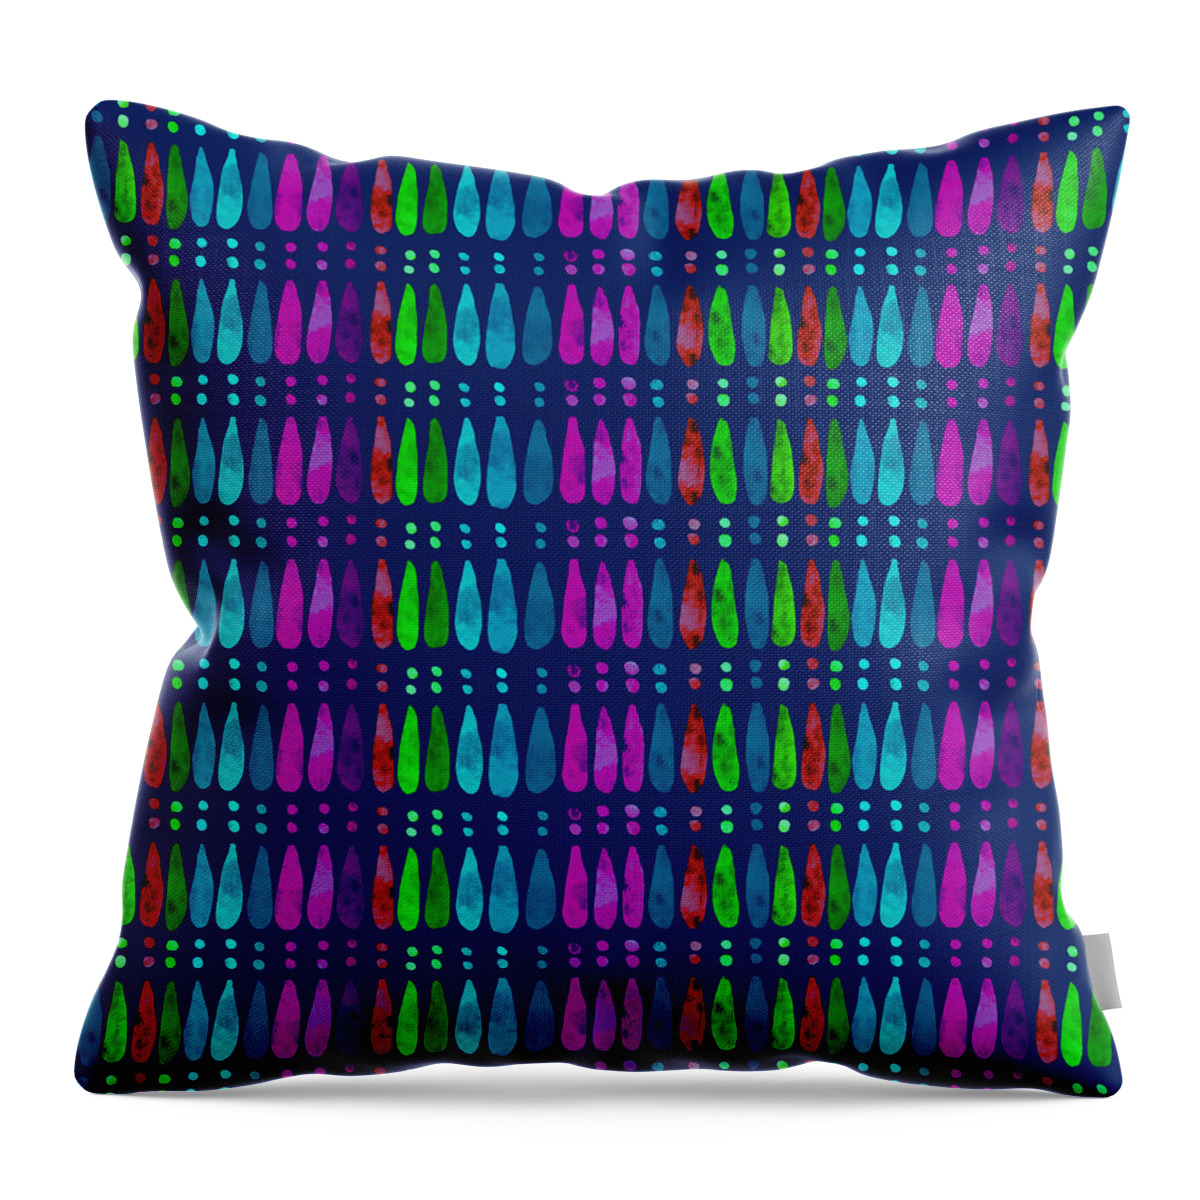 Boho Throw Pillow featuring the painting Boho Stripes - Jewel Tones by Marcy Brennan